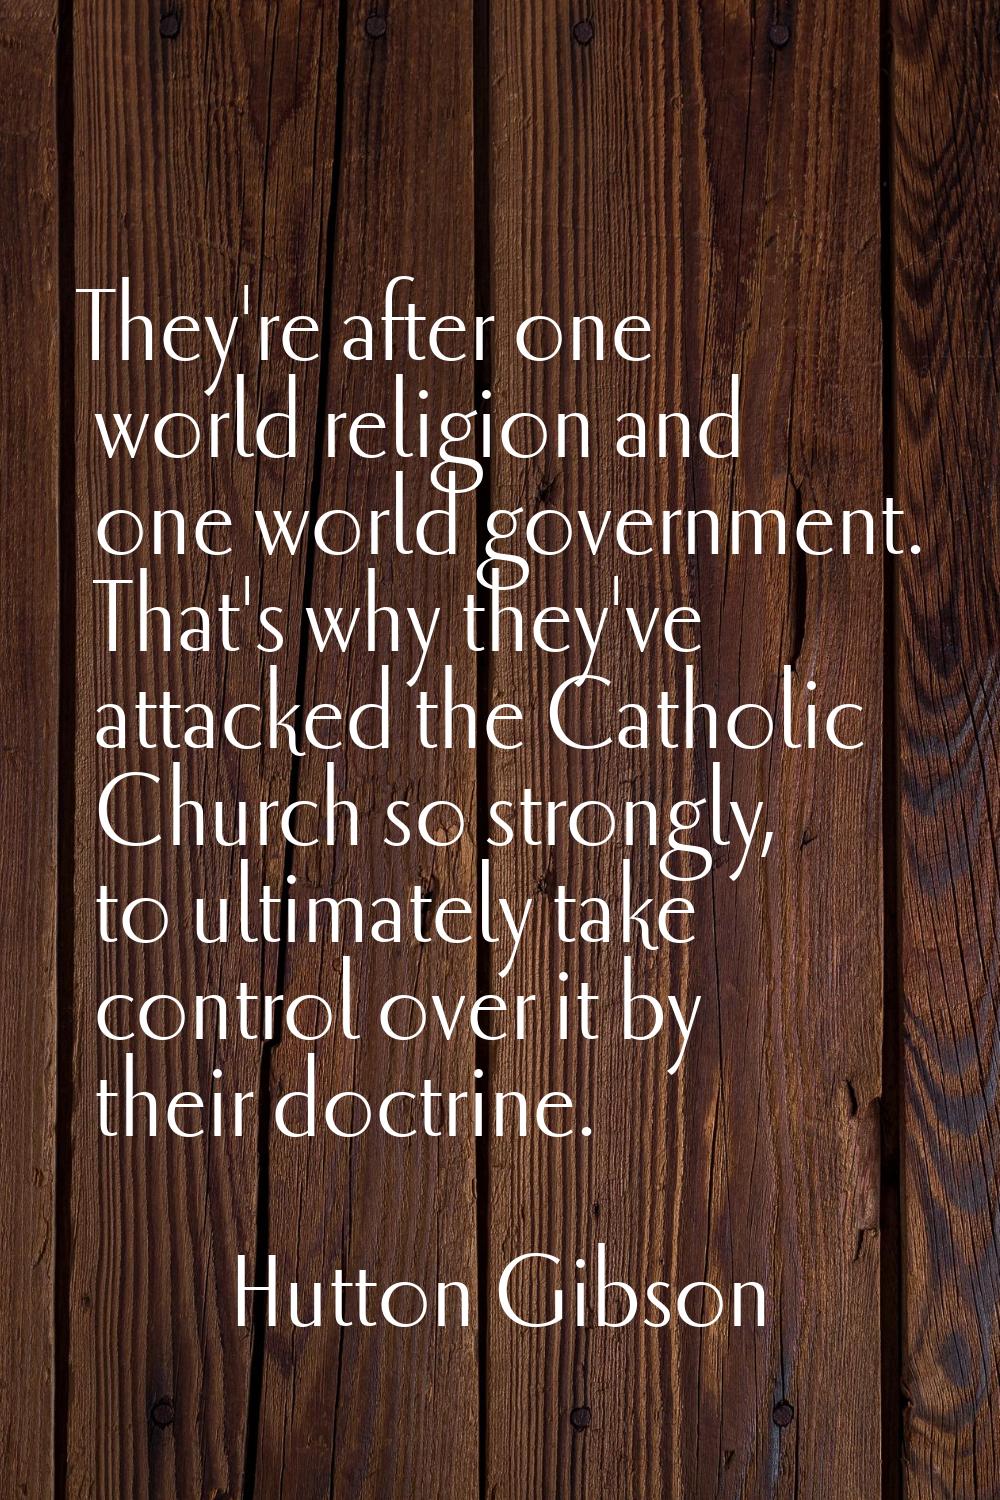 They're after one world religion and one world government. That's why they've attacked the Catholic